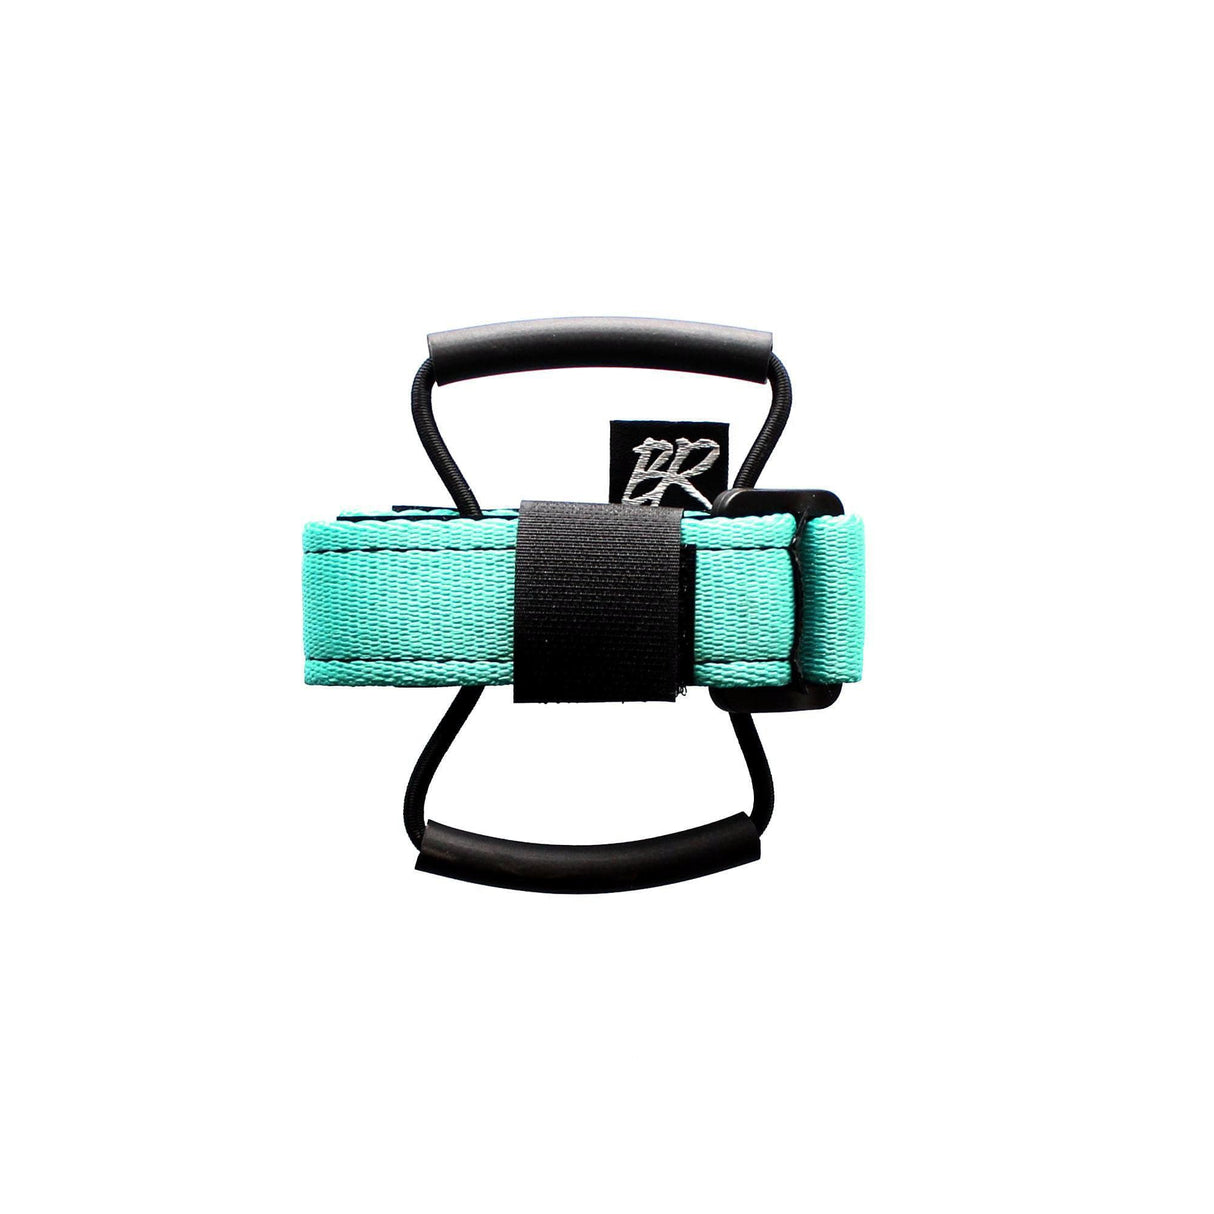 Backcountry Research Camrat Strap Turquoise